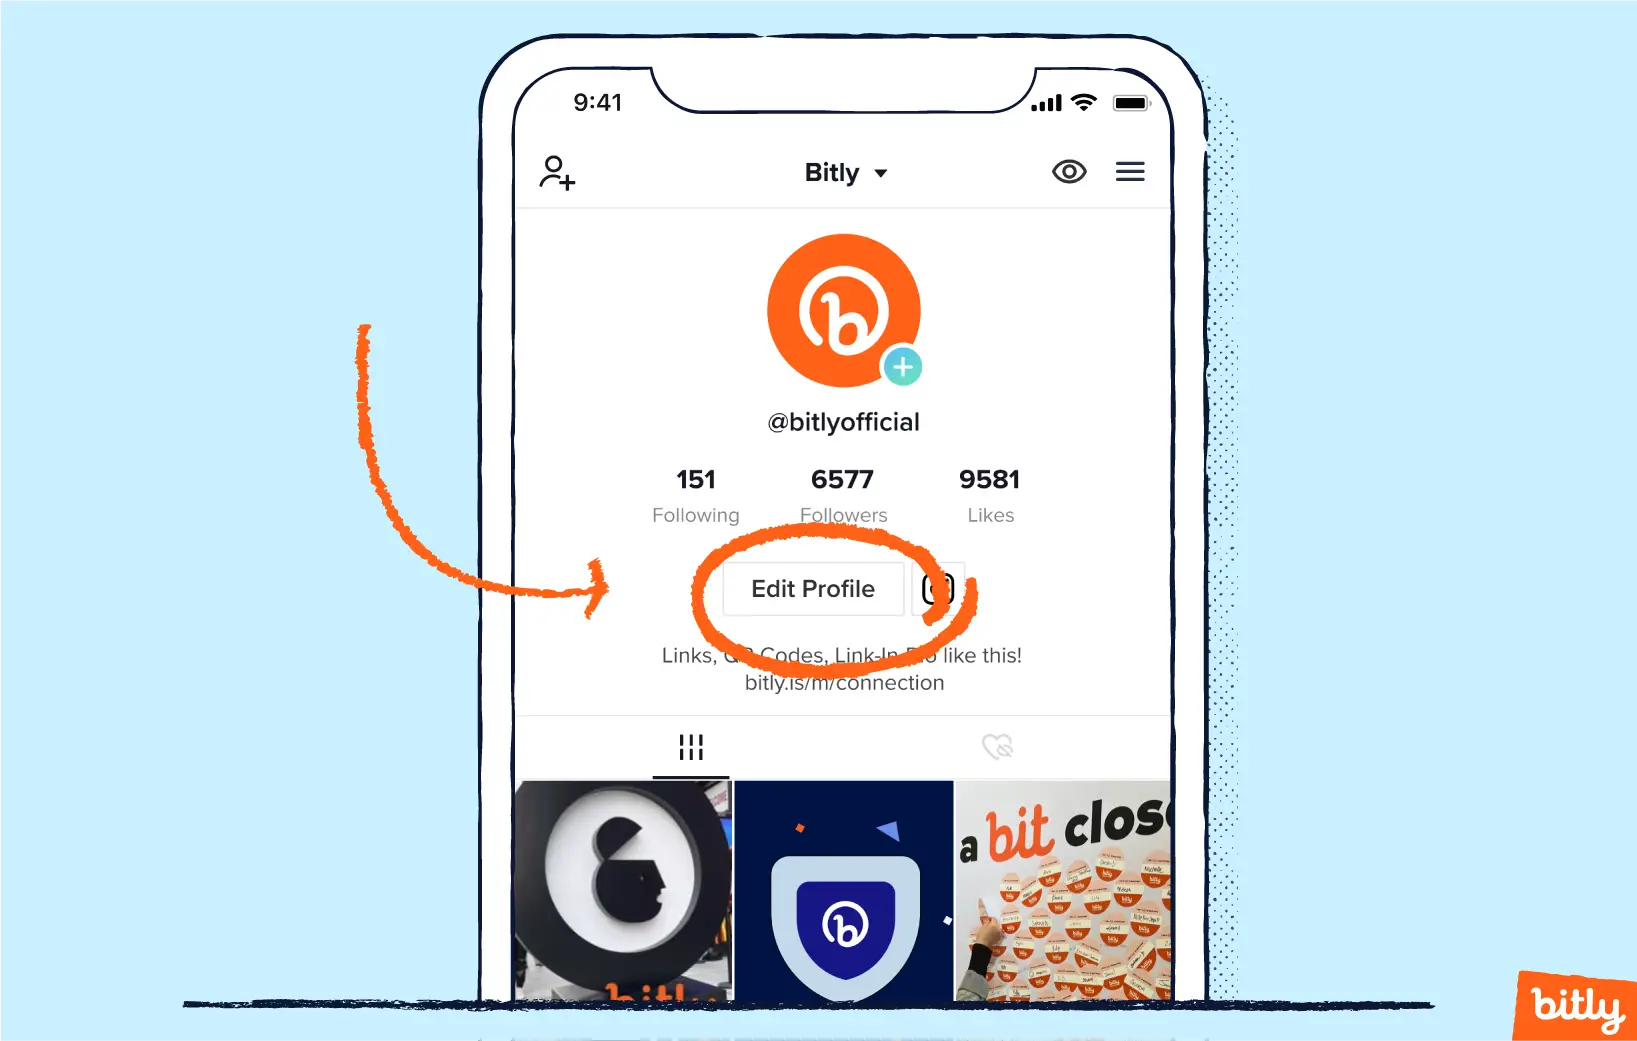 An orange arrow pointing to the circled words Edit Profile on Bitly's TikTok page.